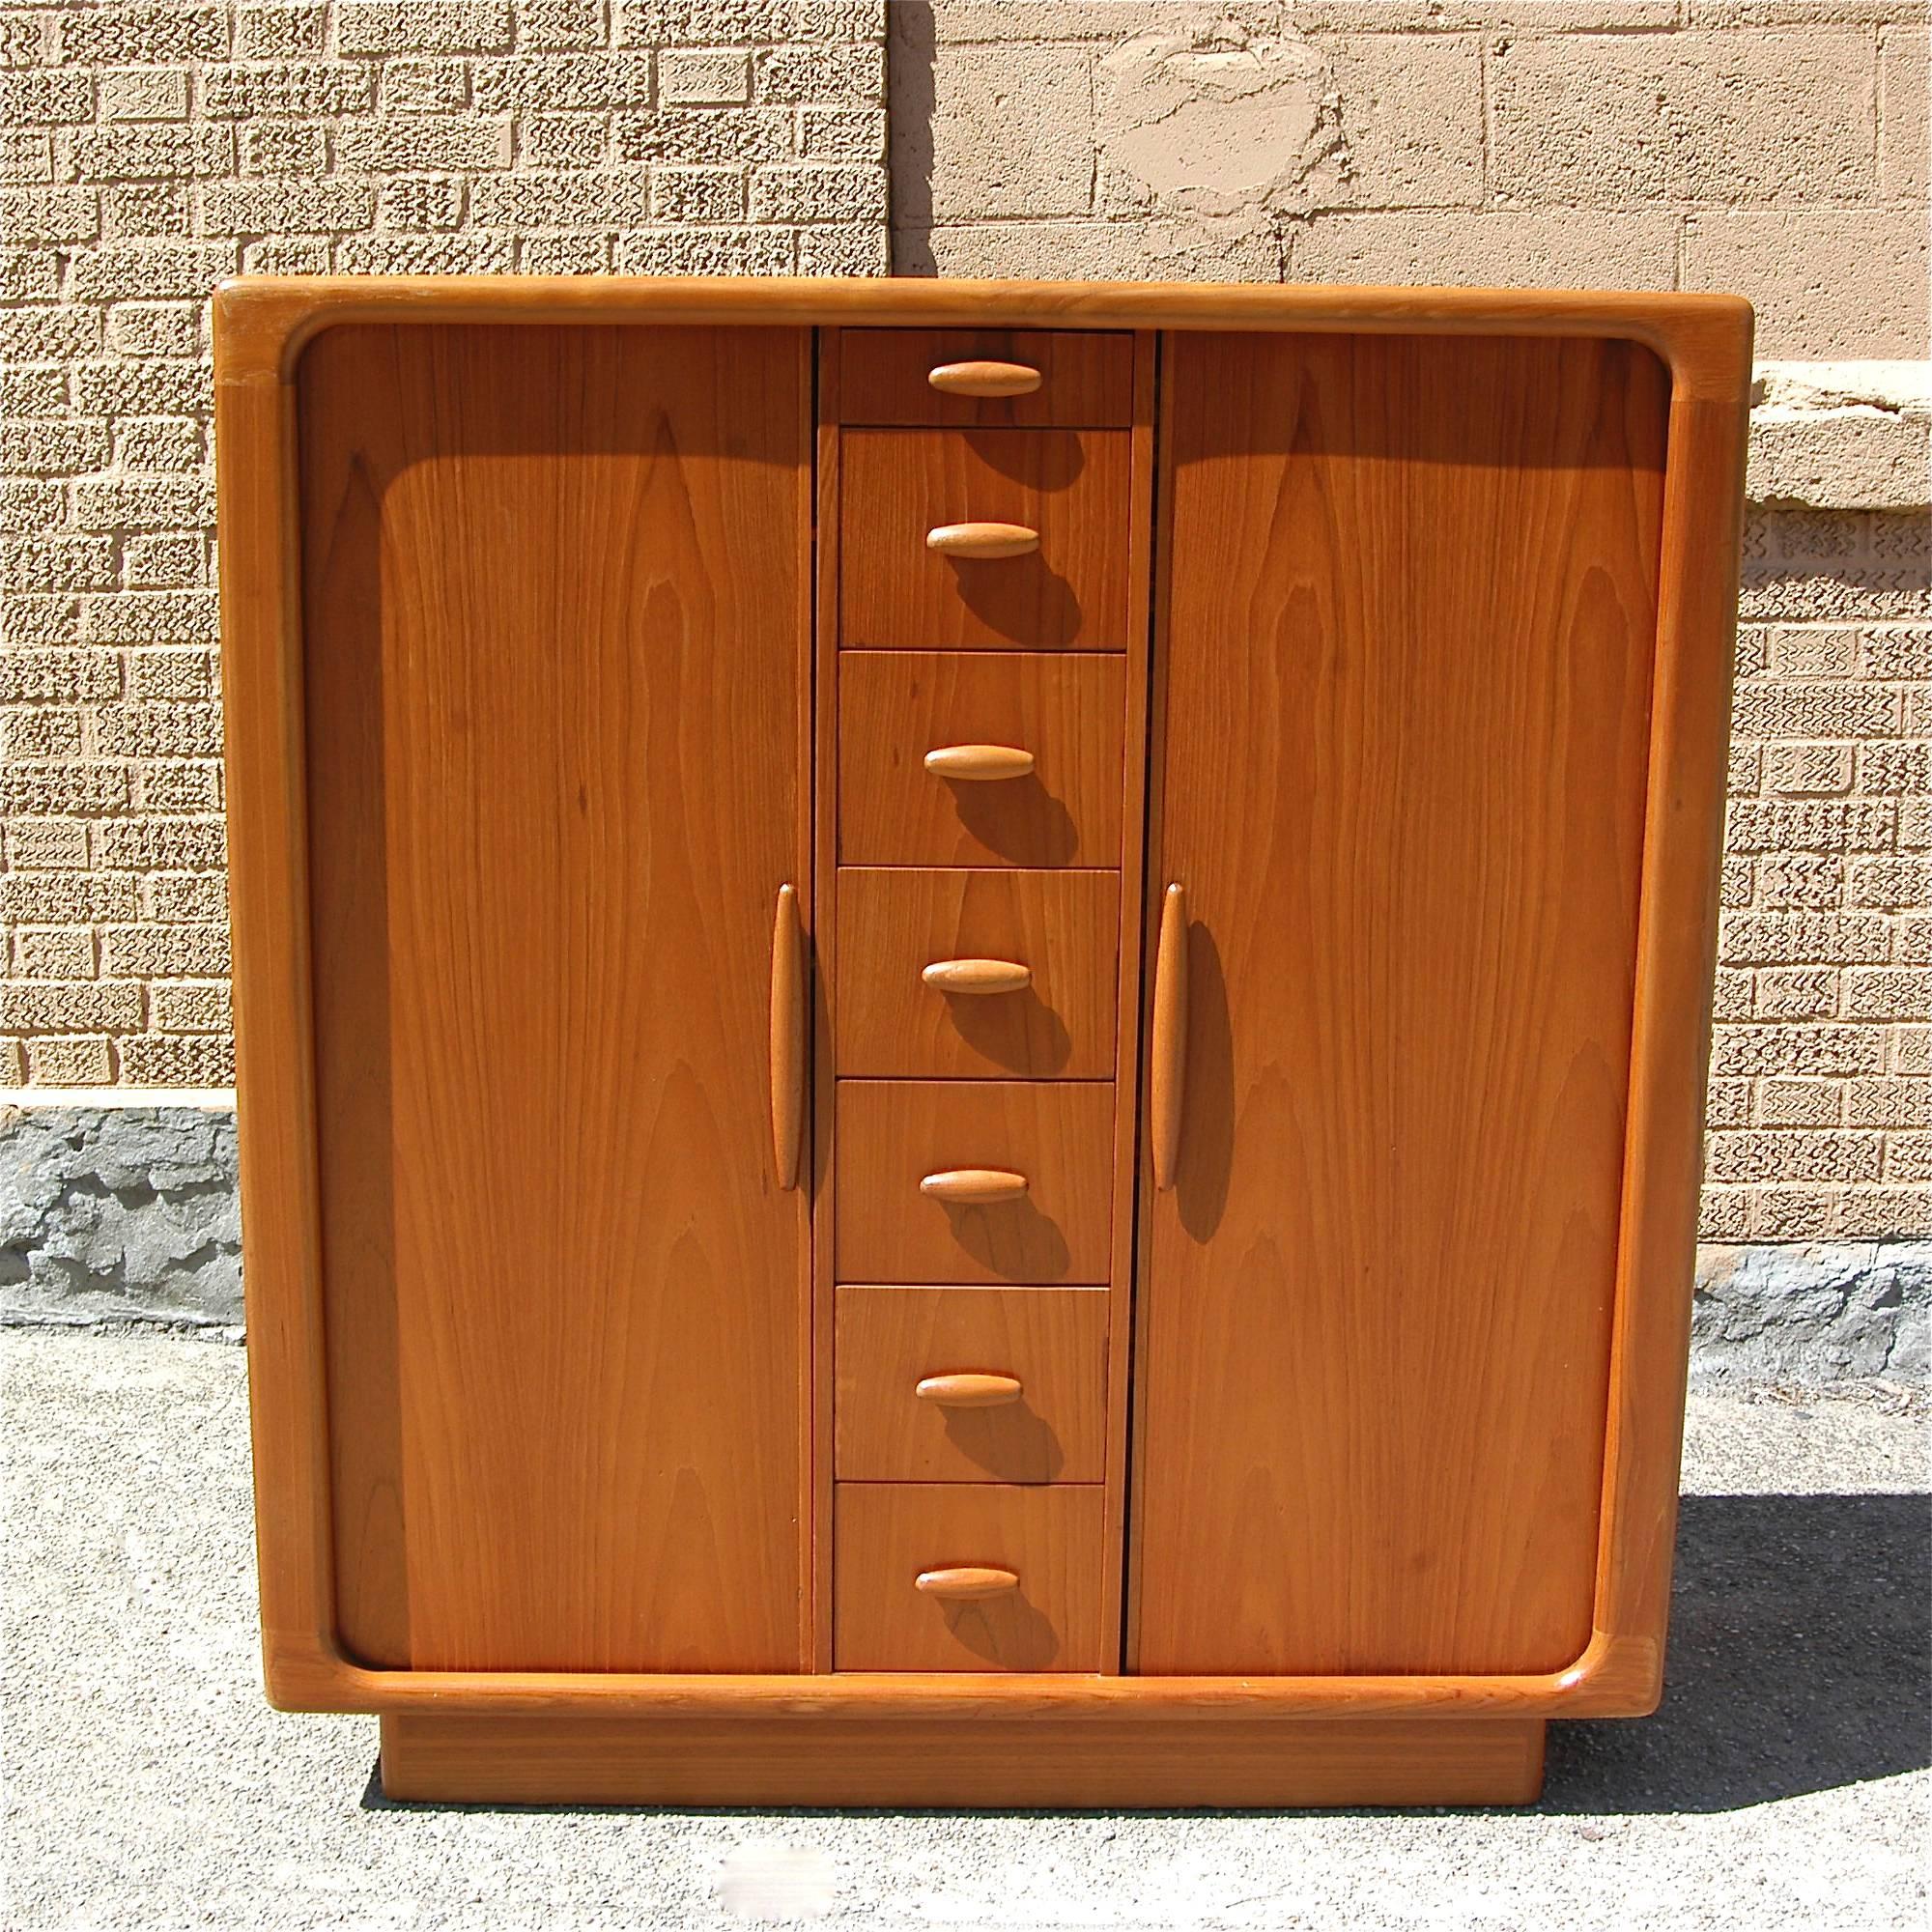 Danish modern, teak, highboy, gentleman's dresser by Dyrlund with a center row of small drawers and tambour side doors that open to reveal adjustable shelves and pull out drawers. 2 available.